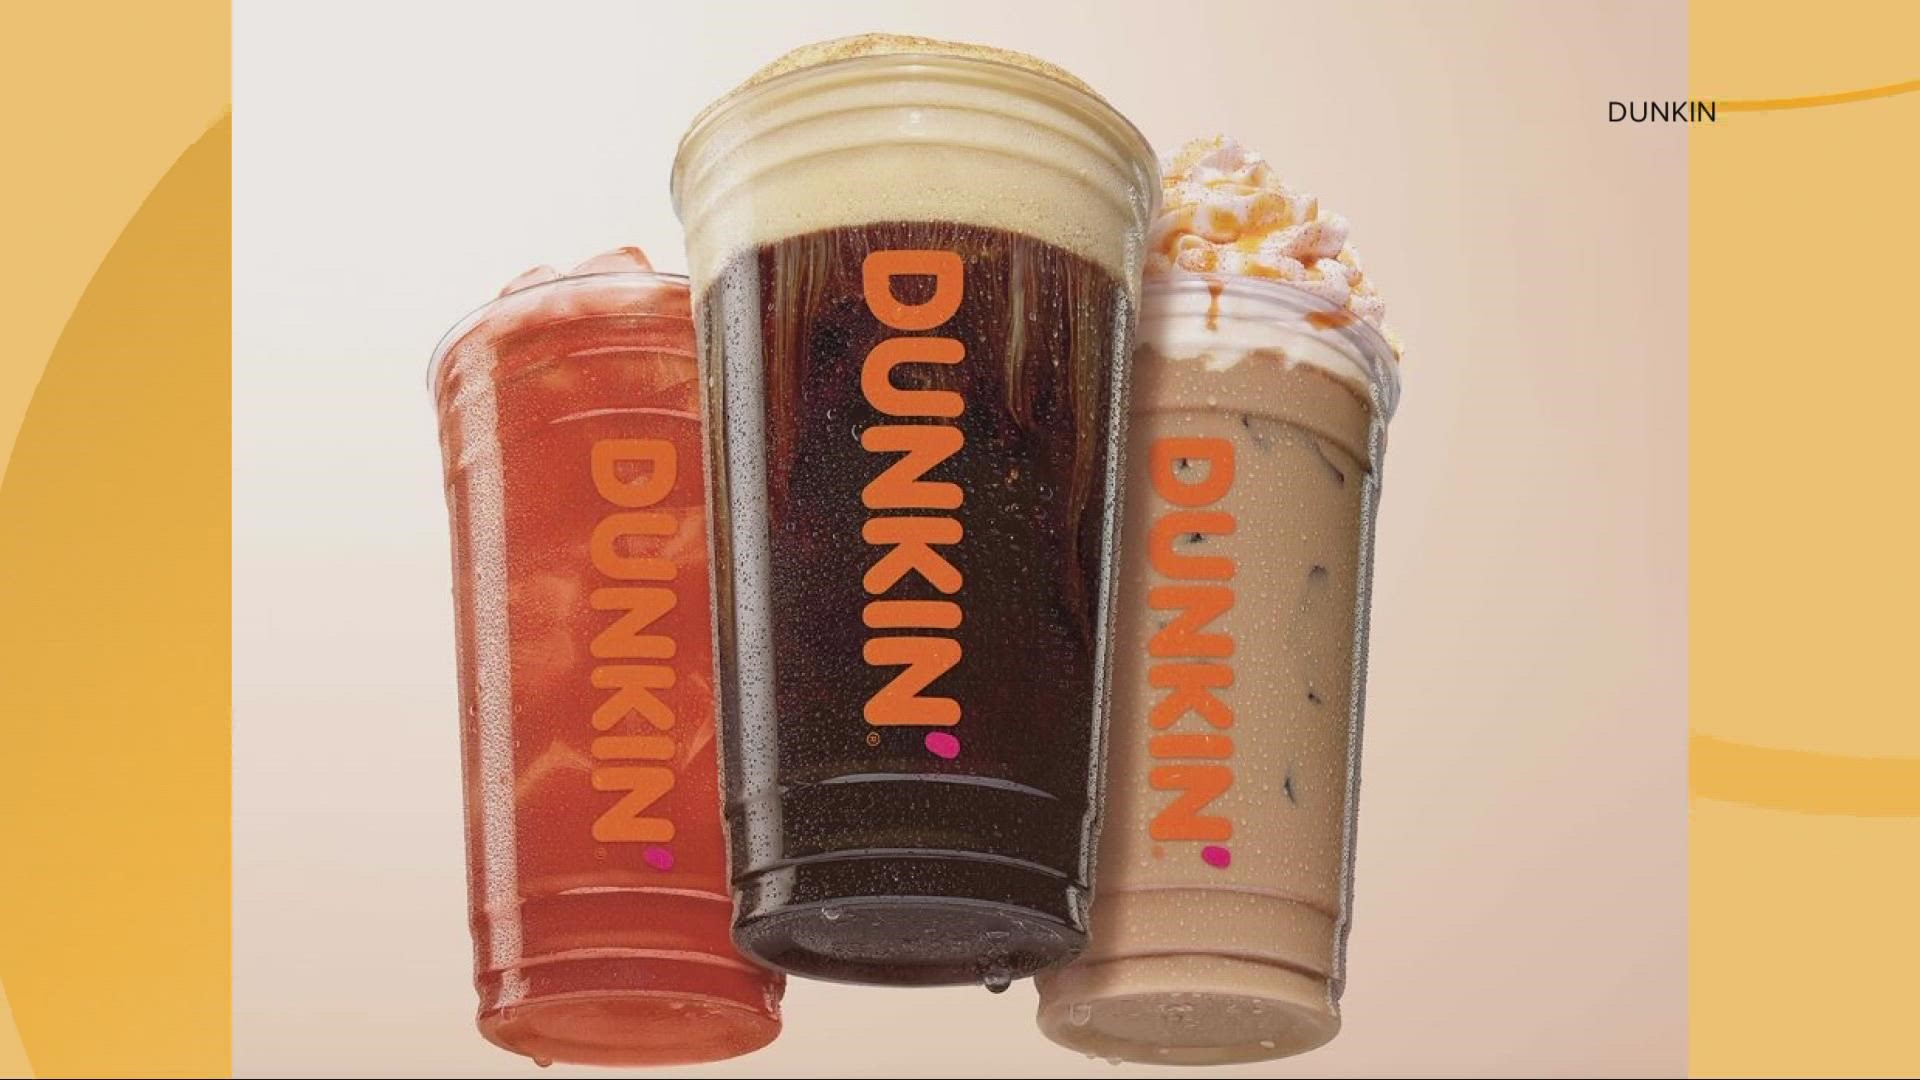 Pumpkin spiced latte is back at Dunkin with some new fall flavors as well.